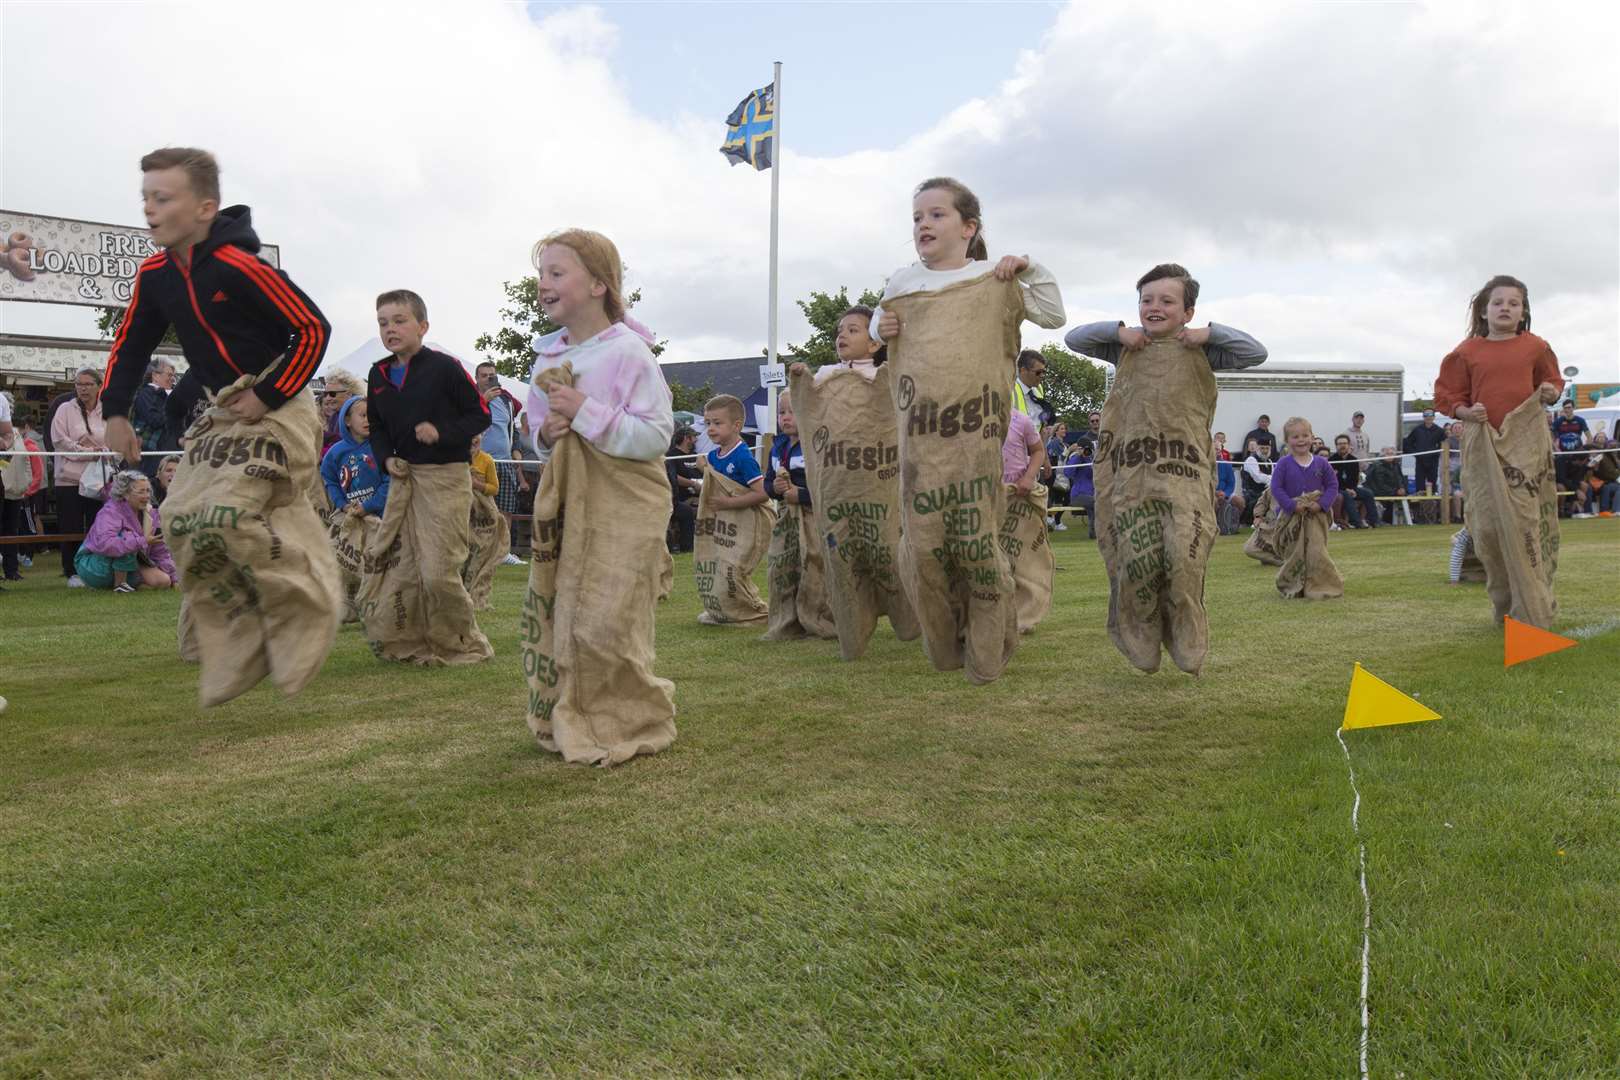 Action from the under 9 years sack race. Picture: Robert MacDonald/Northern Studios